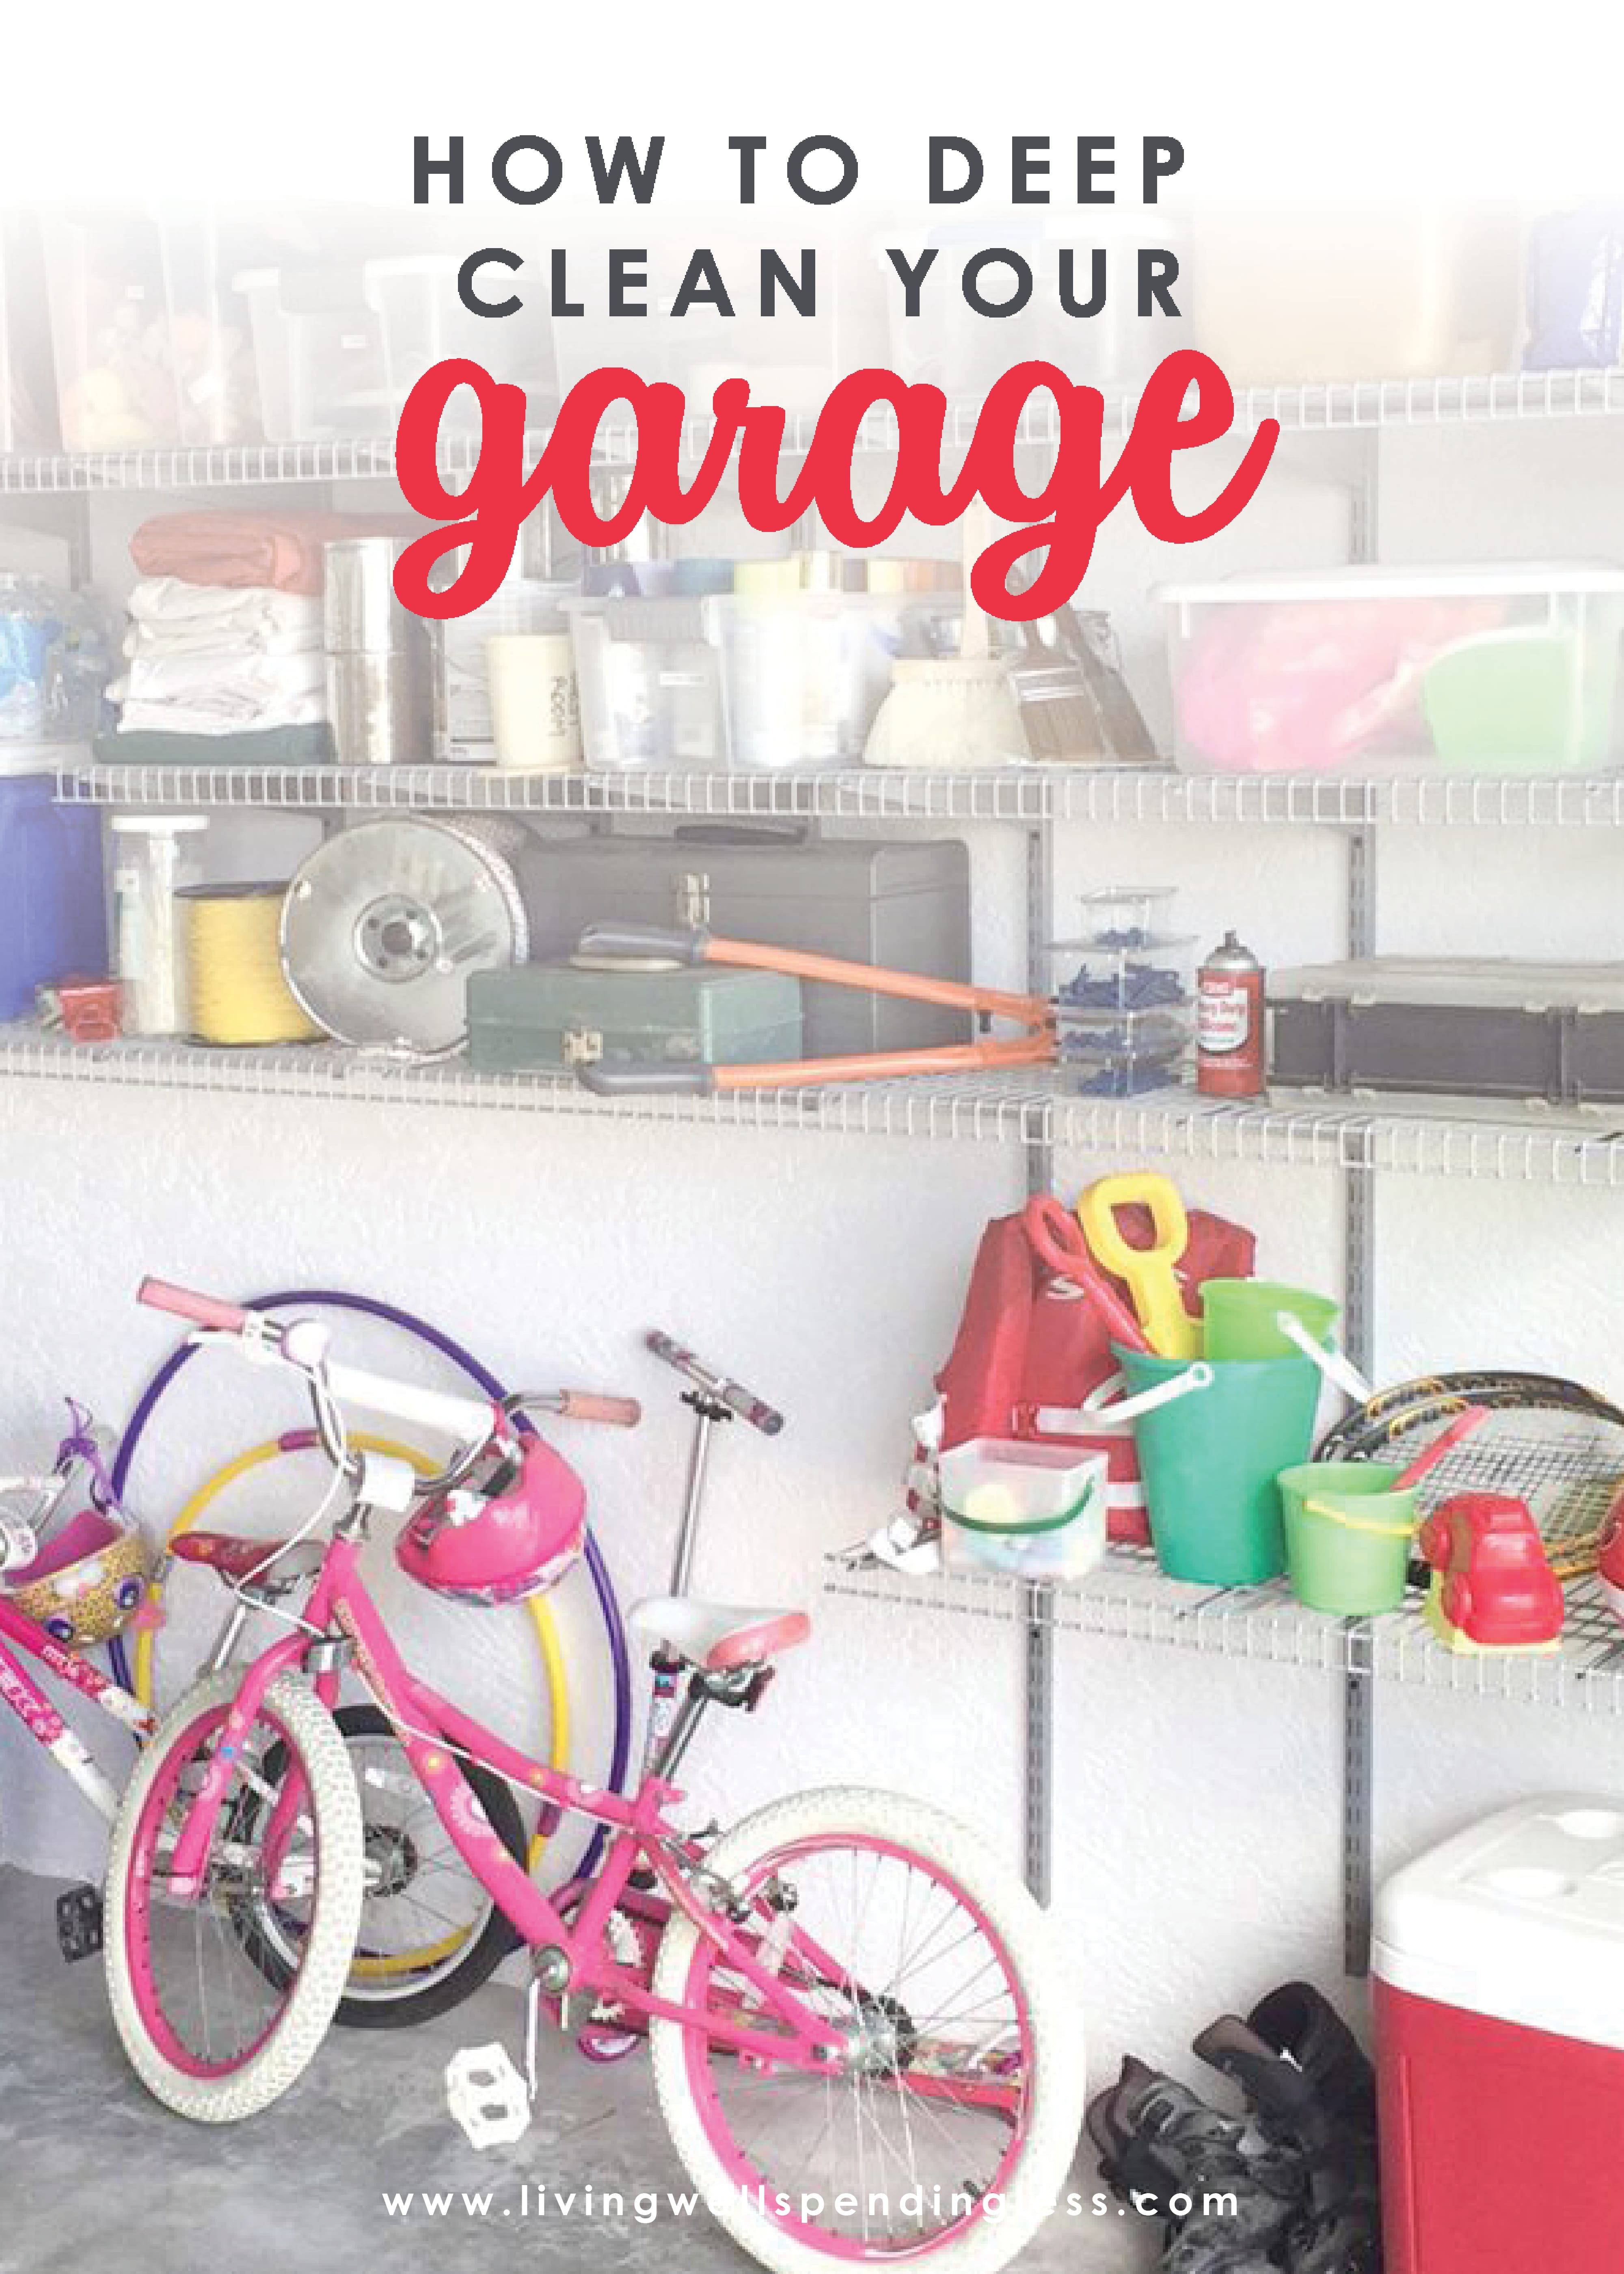 How To Clean A Garage How to Deep Clean Your Garage in 6 Steps | Decluttering Your Garage